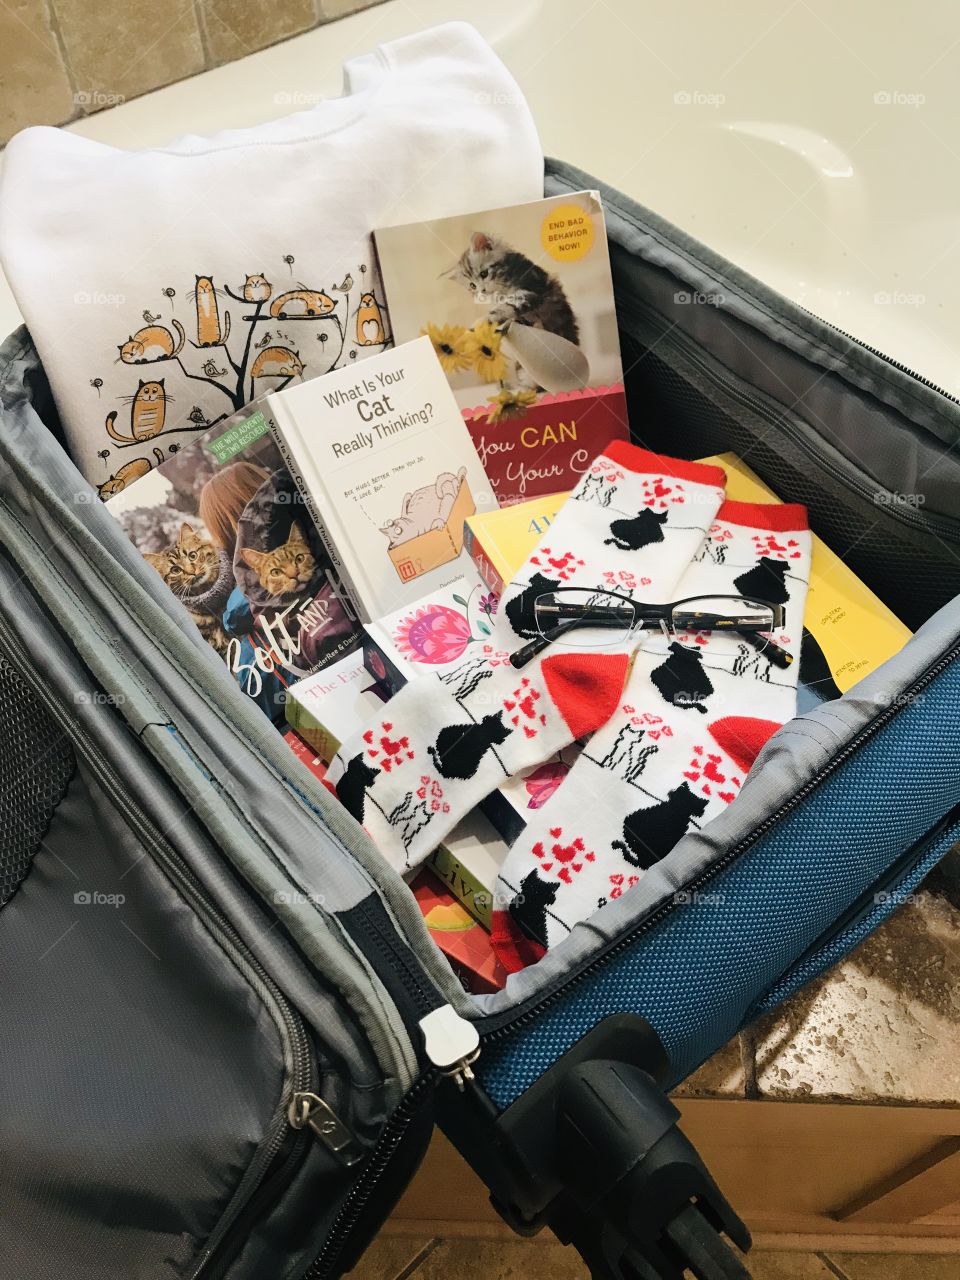 Let’s get ready to travel with best feel good cat reads, reading glasses, and favorite cozy kitty sweatshirt and socks for reading! 